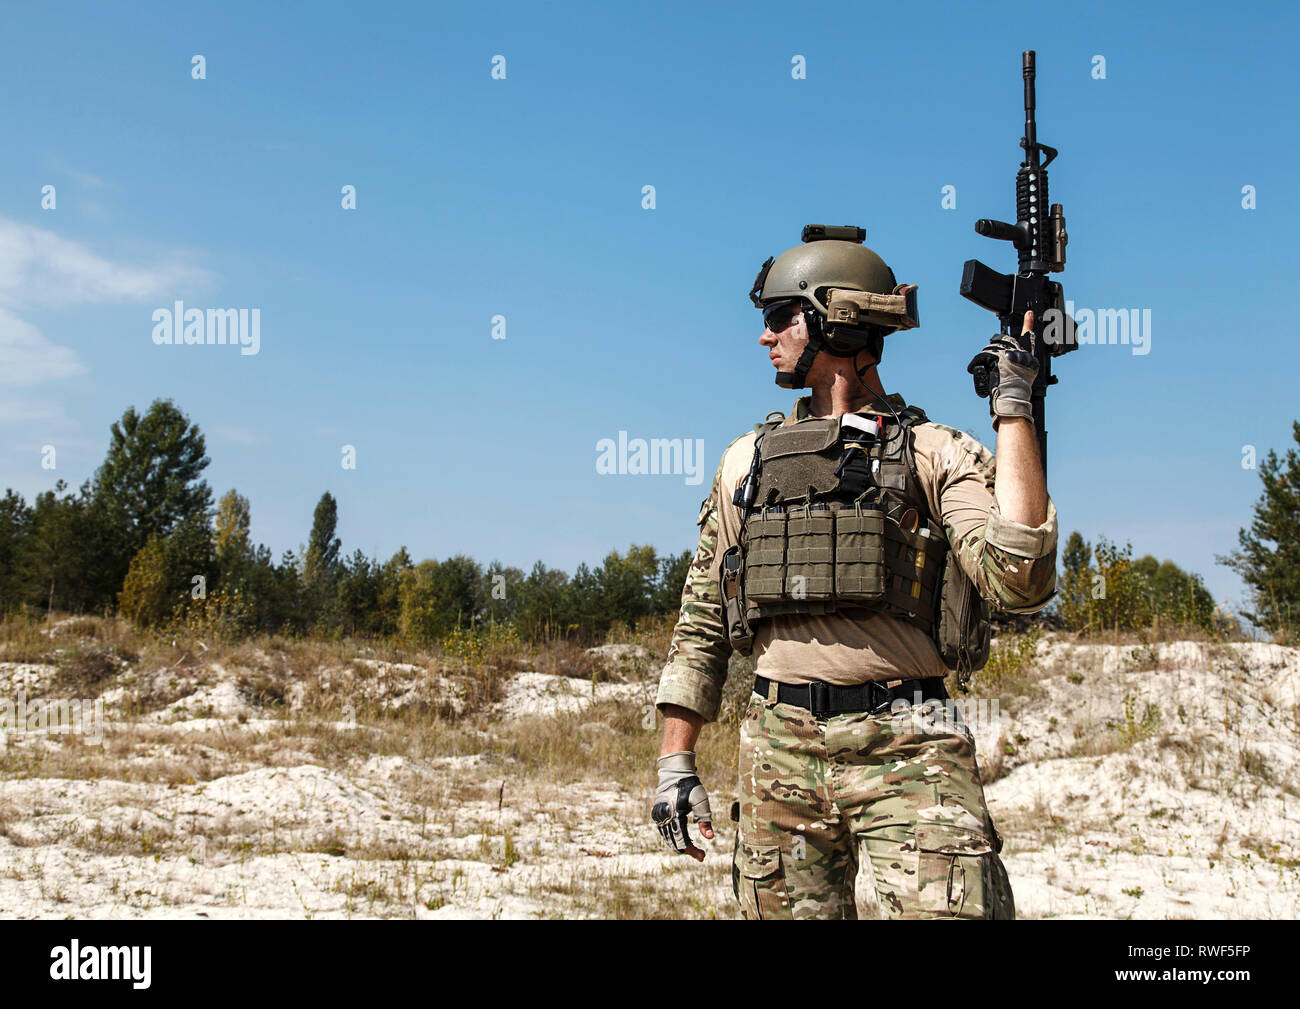 U.S. Army Ranger with weapon in the desert Stock Photo - Alamy